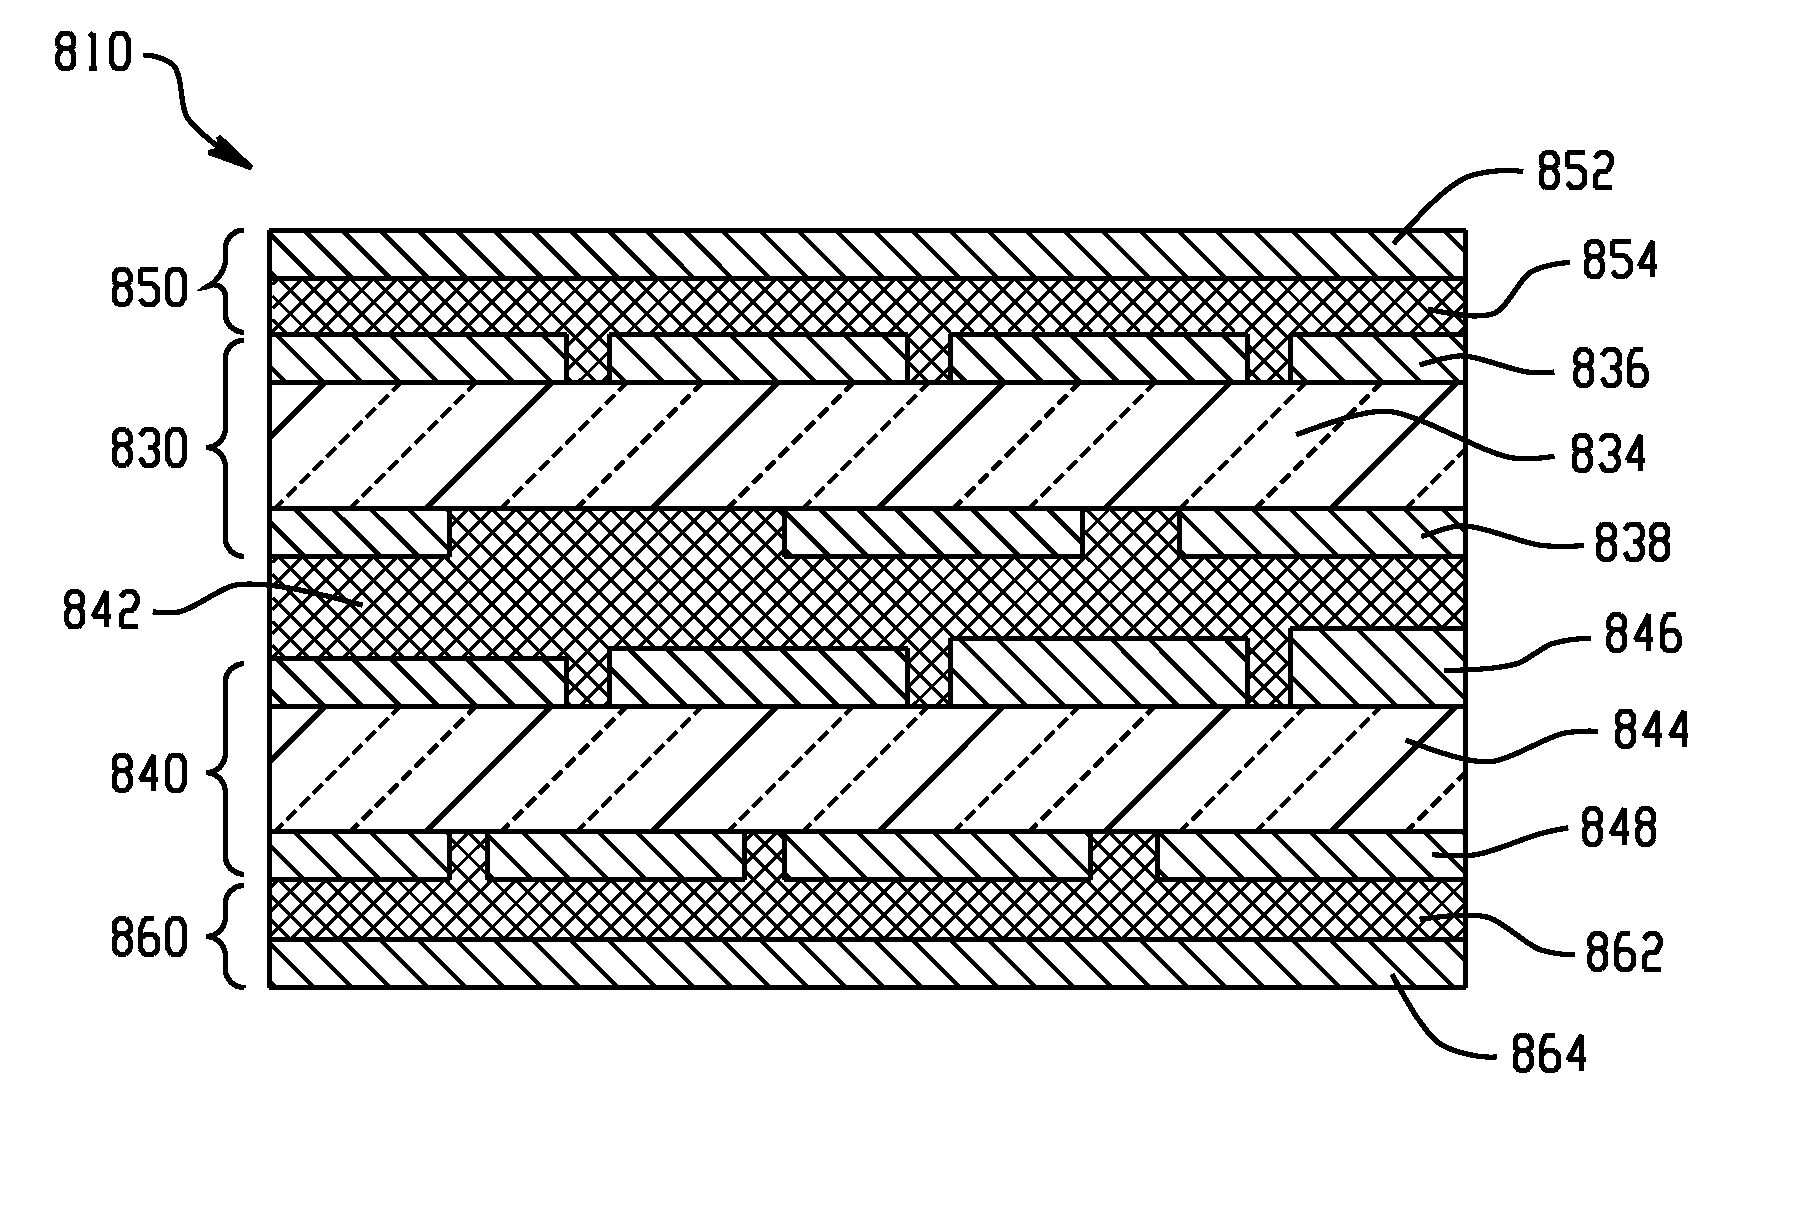 Dielectric materials, methods of forming subassemblies therefrom, and the subassemblies formed therewith